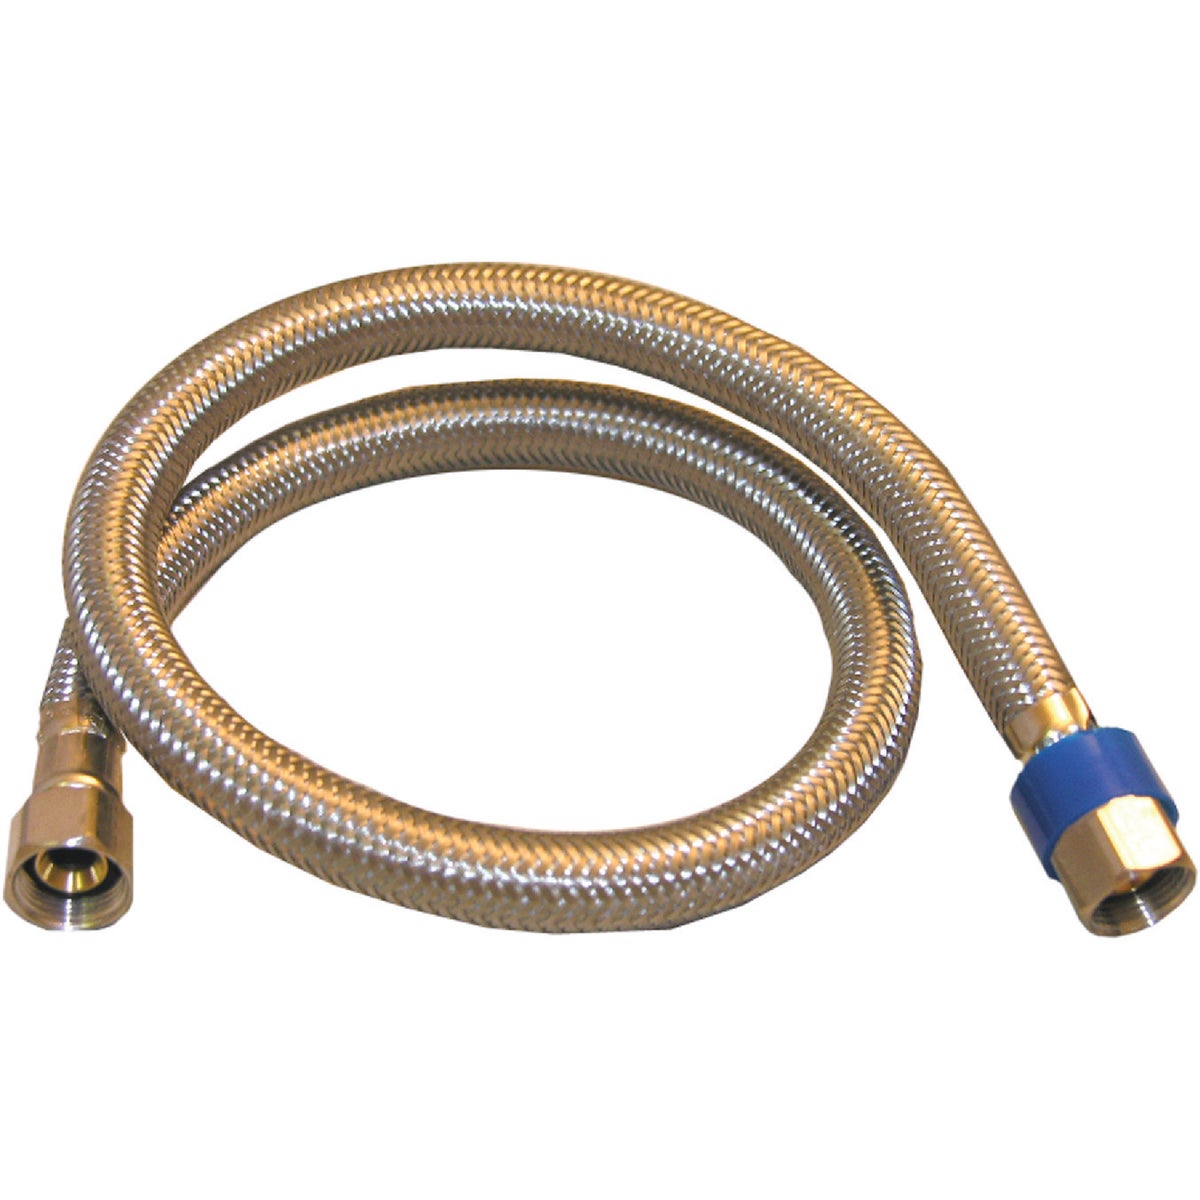 Lasco 3/8 In.C x 3/8 In.C x 24 In. L Braided Stainless Steel Flex Line Appliance Water Connector